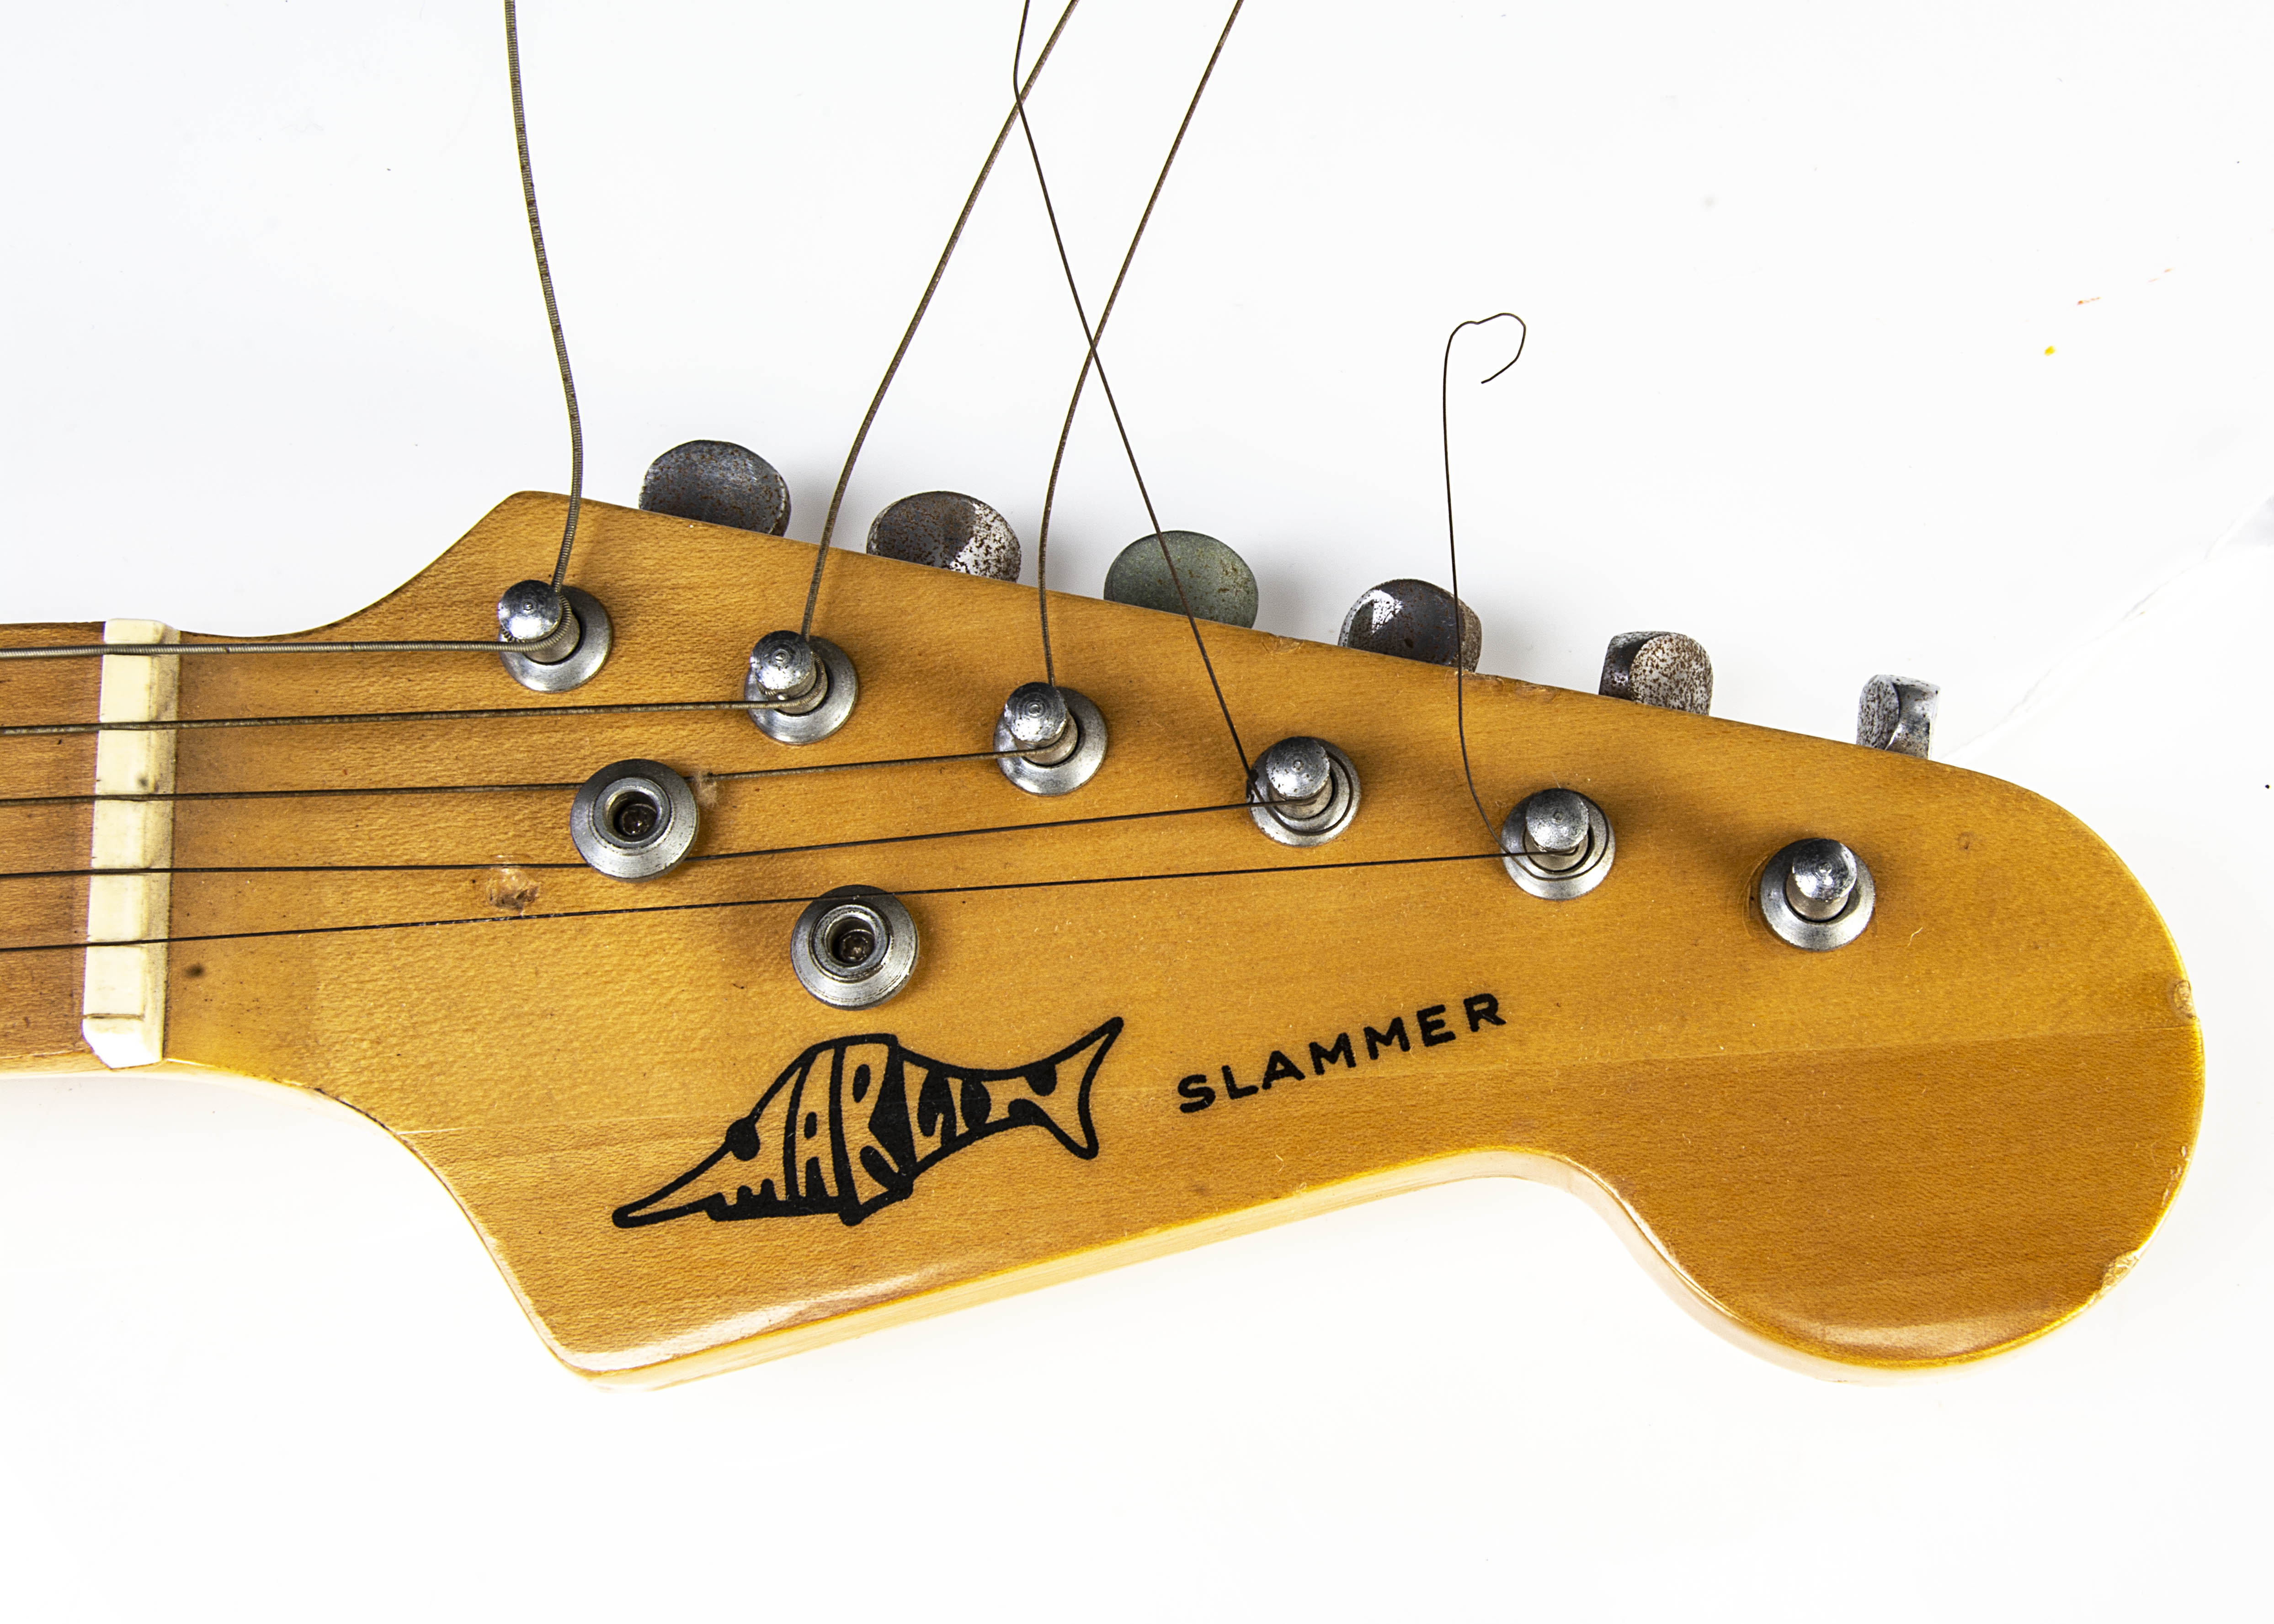 Three Electric Guitars, three Stratocaster style electric guitars, a Marlin Slammer s/n 734056, a - Image 6 of 6